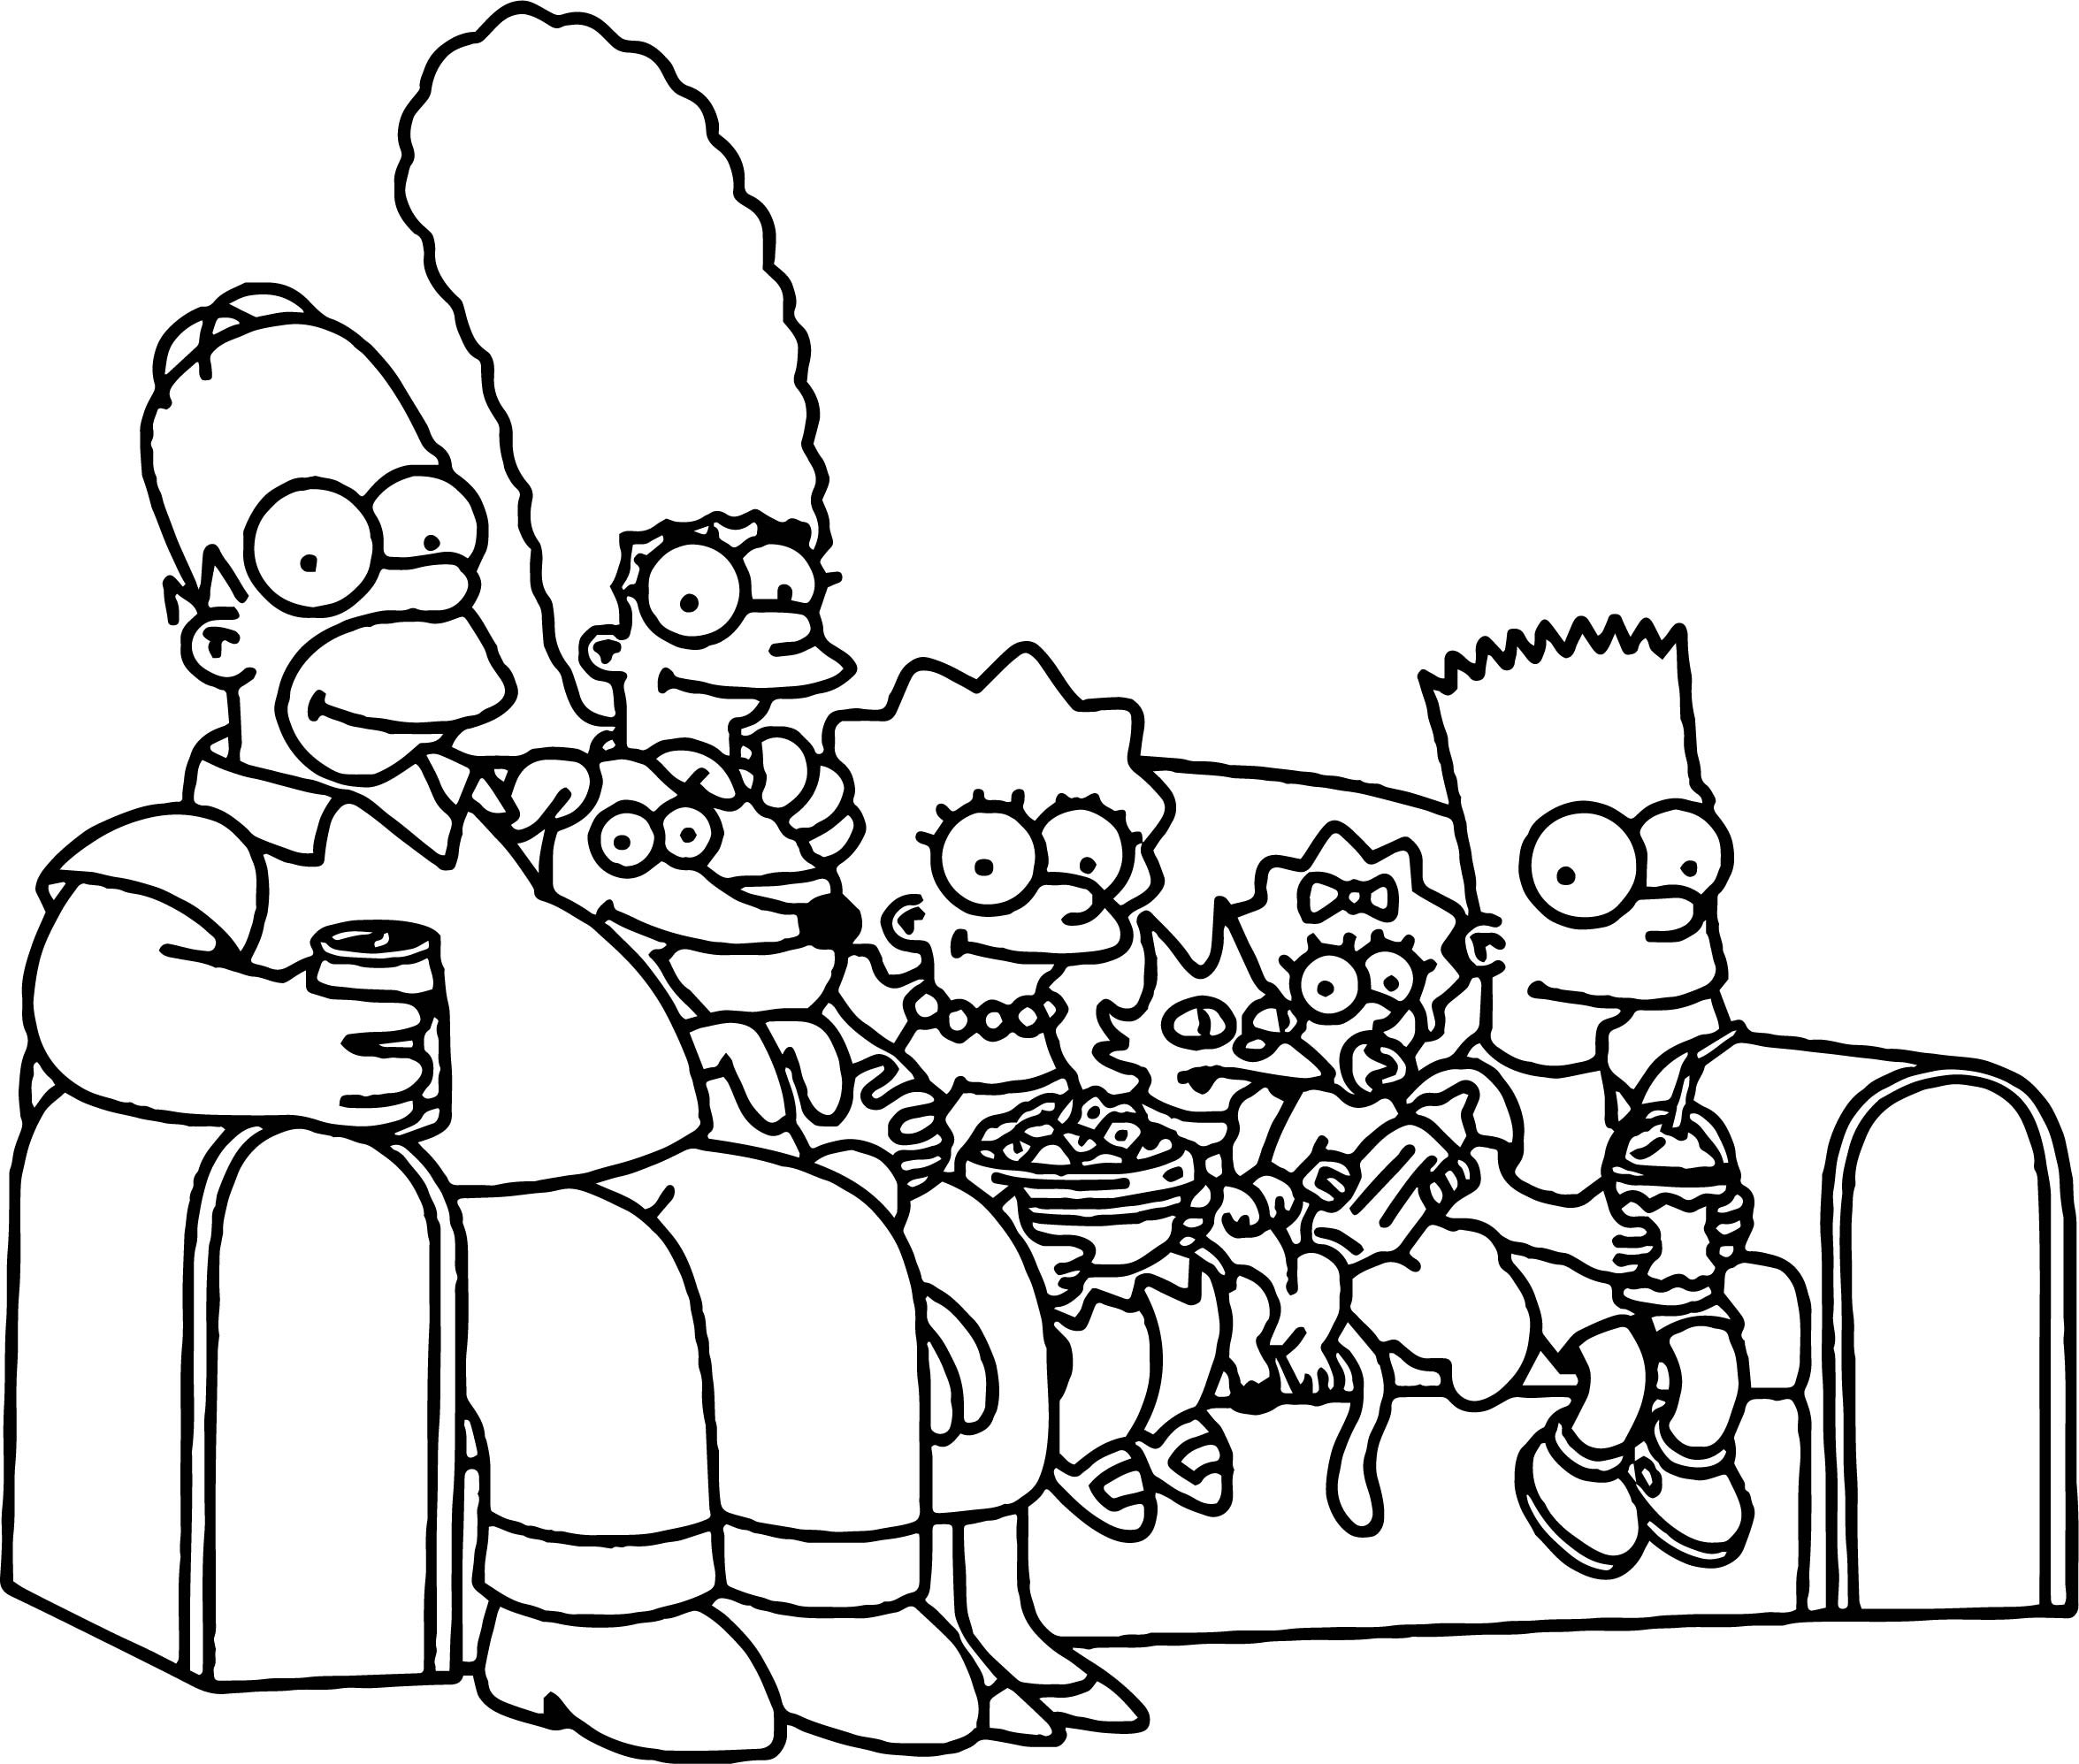 Simpsons Coloring Pages 5 Topcoloringpages Net Free C - vrogue.co